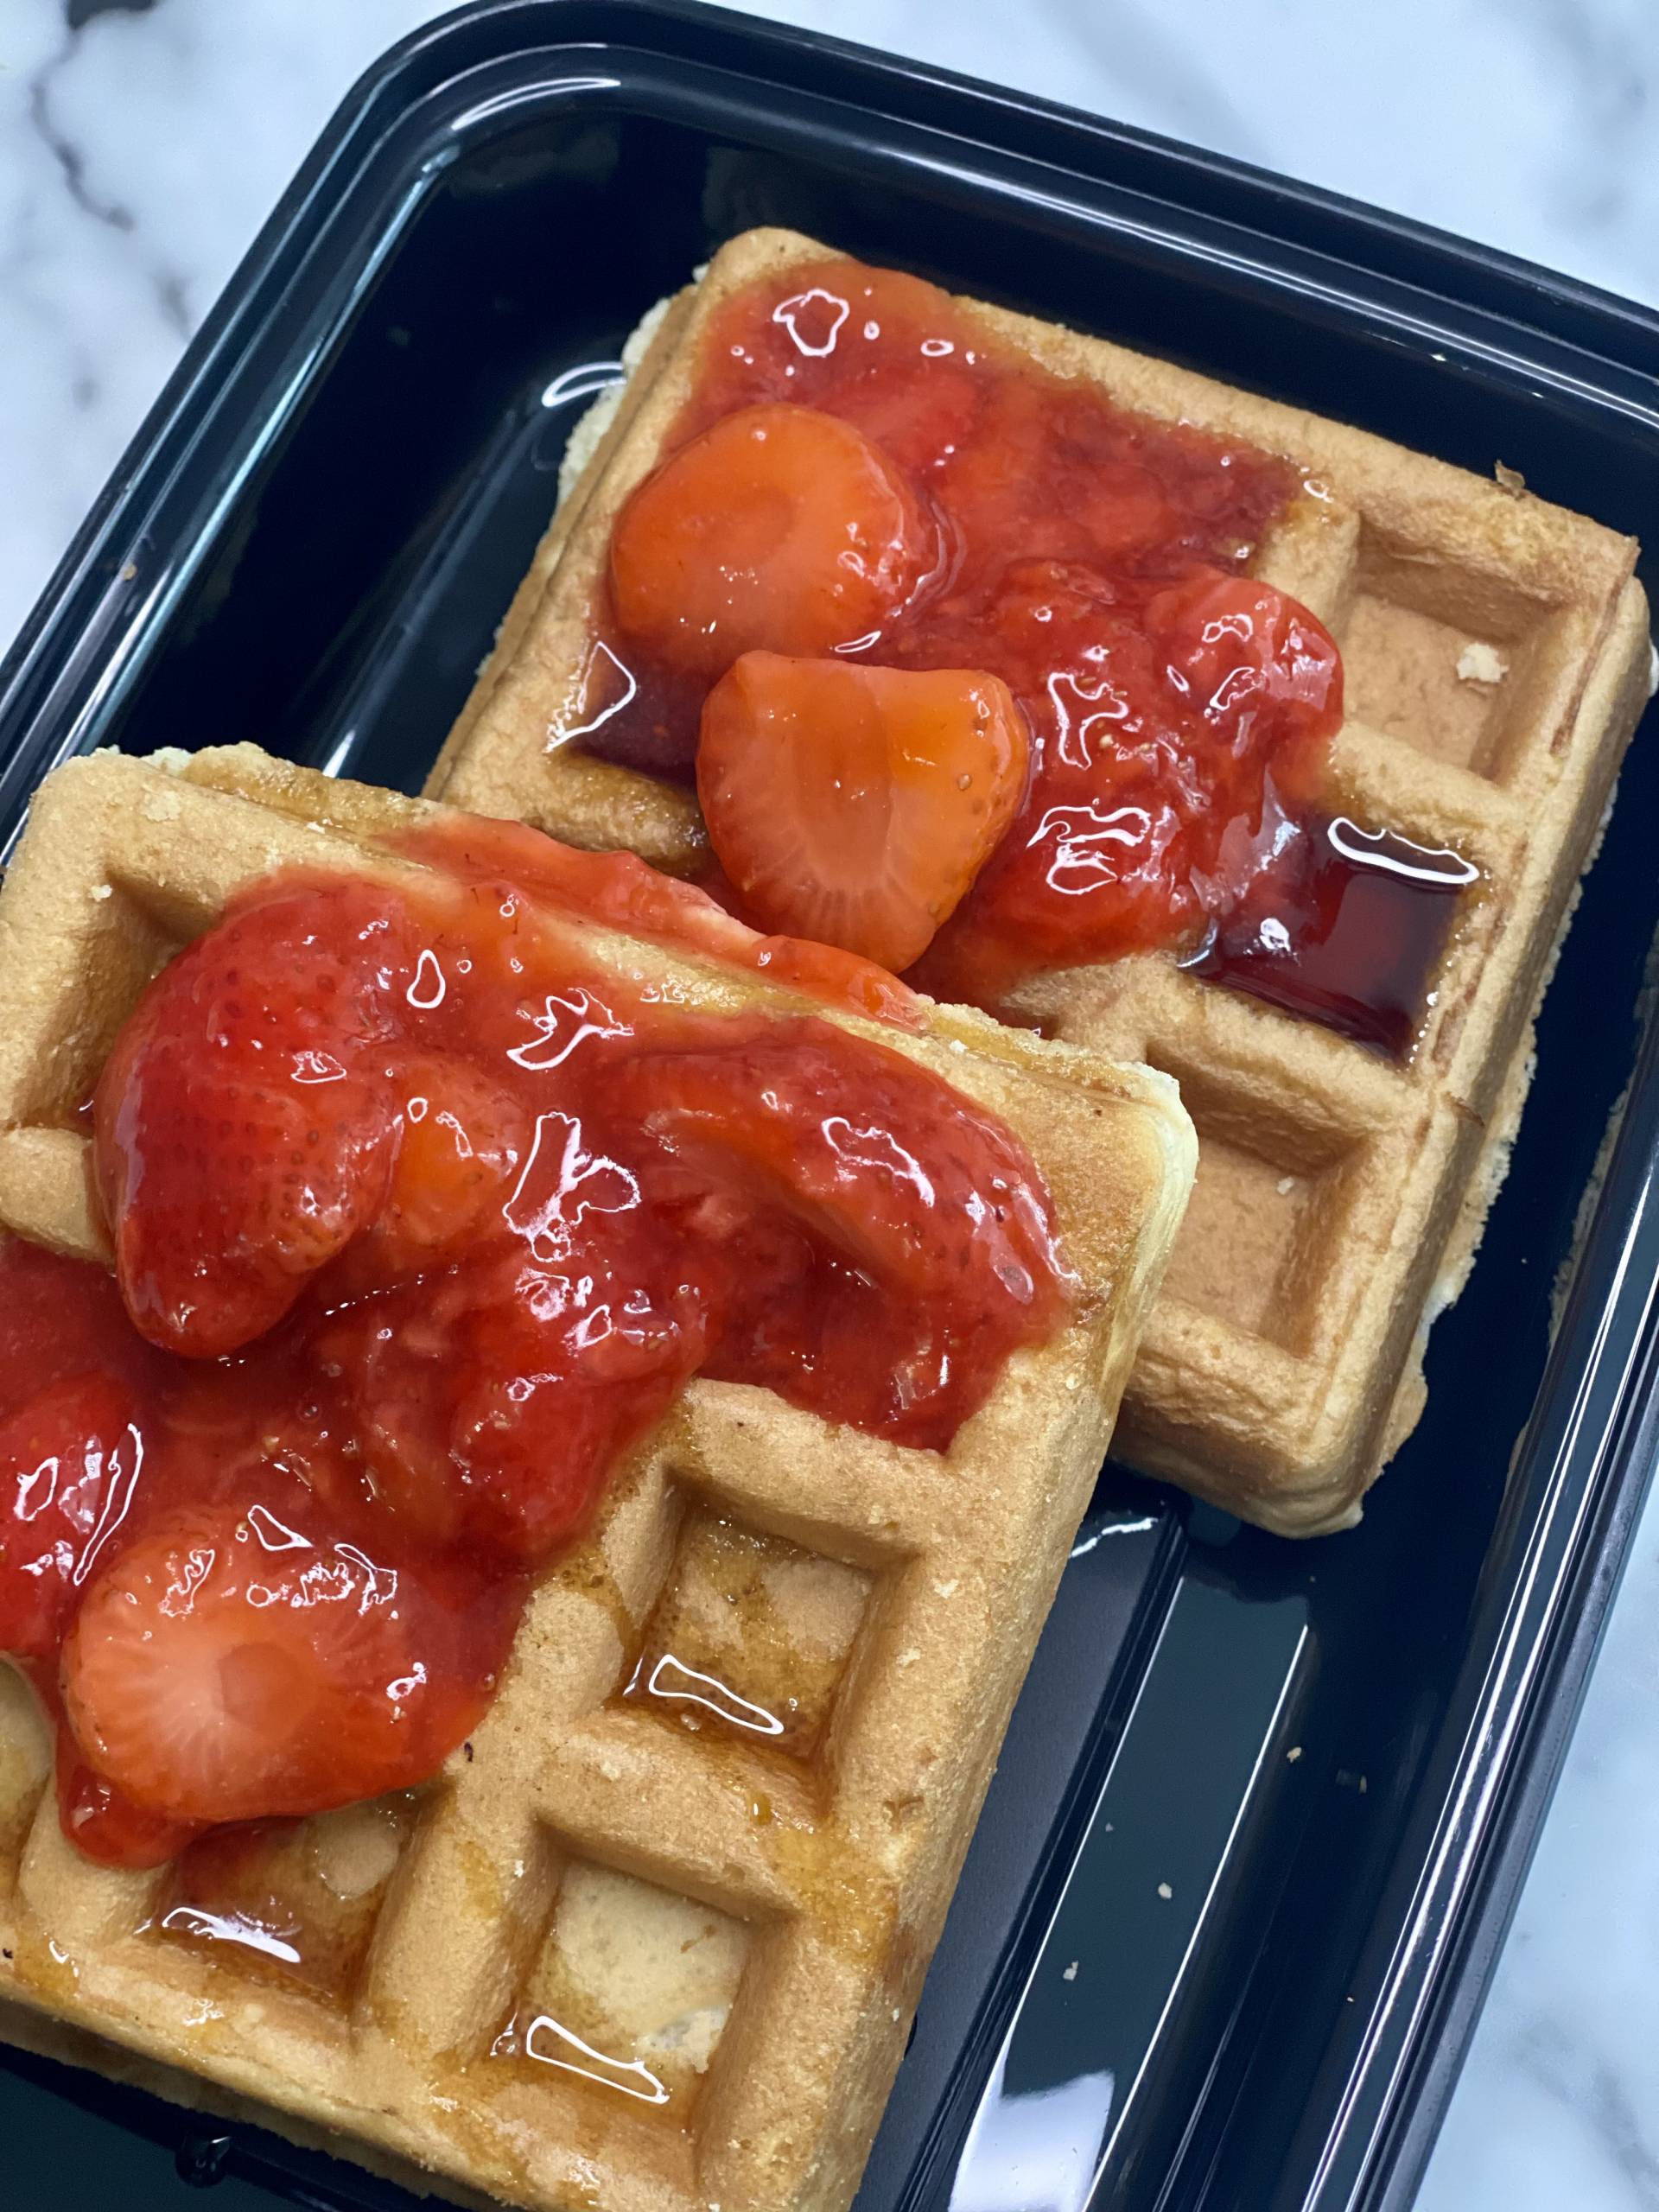 Breakfast: Waffles with Tripe Berry Compote